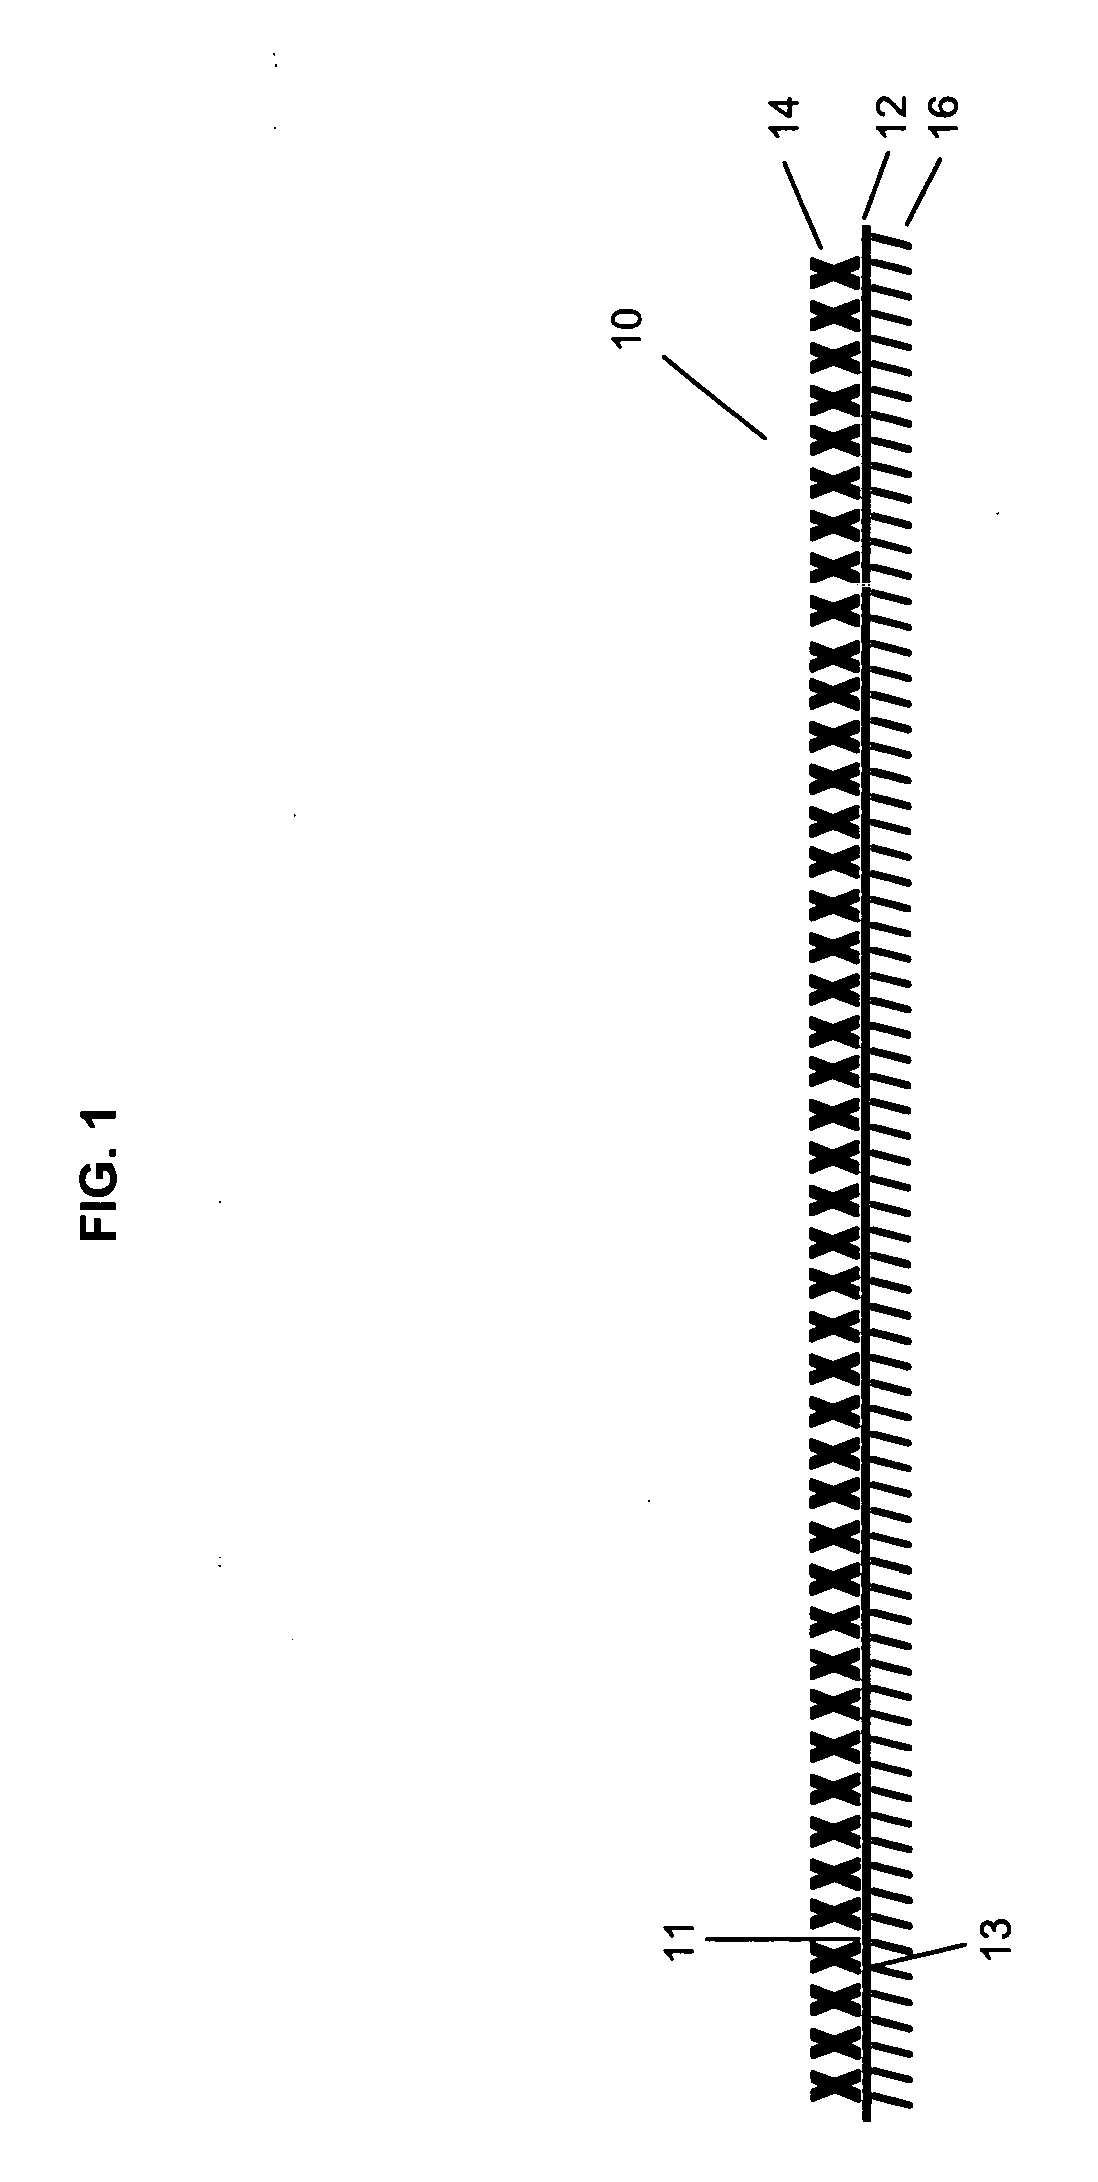 Linerless label with starch based release coating and method of creating